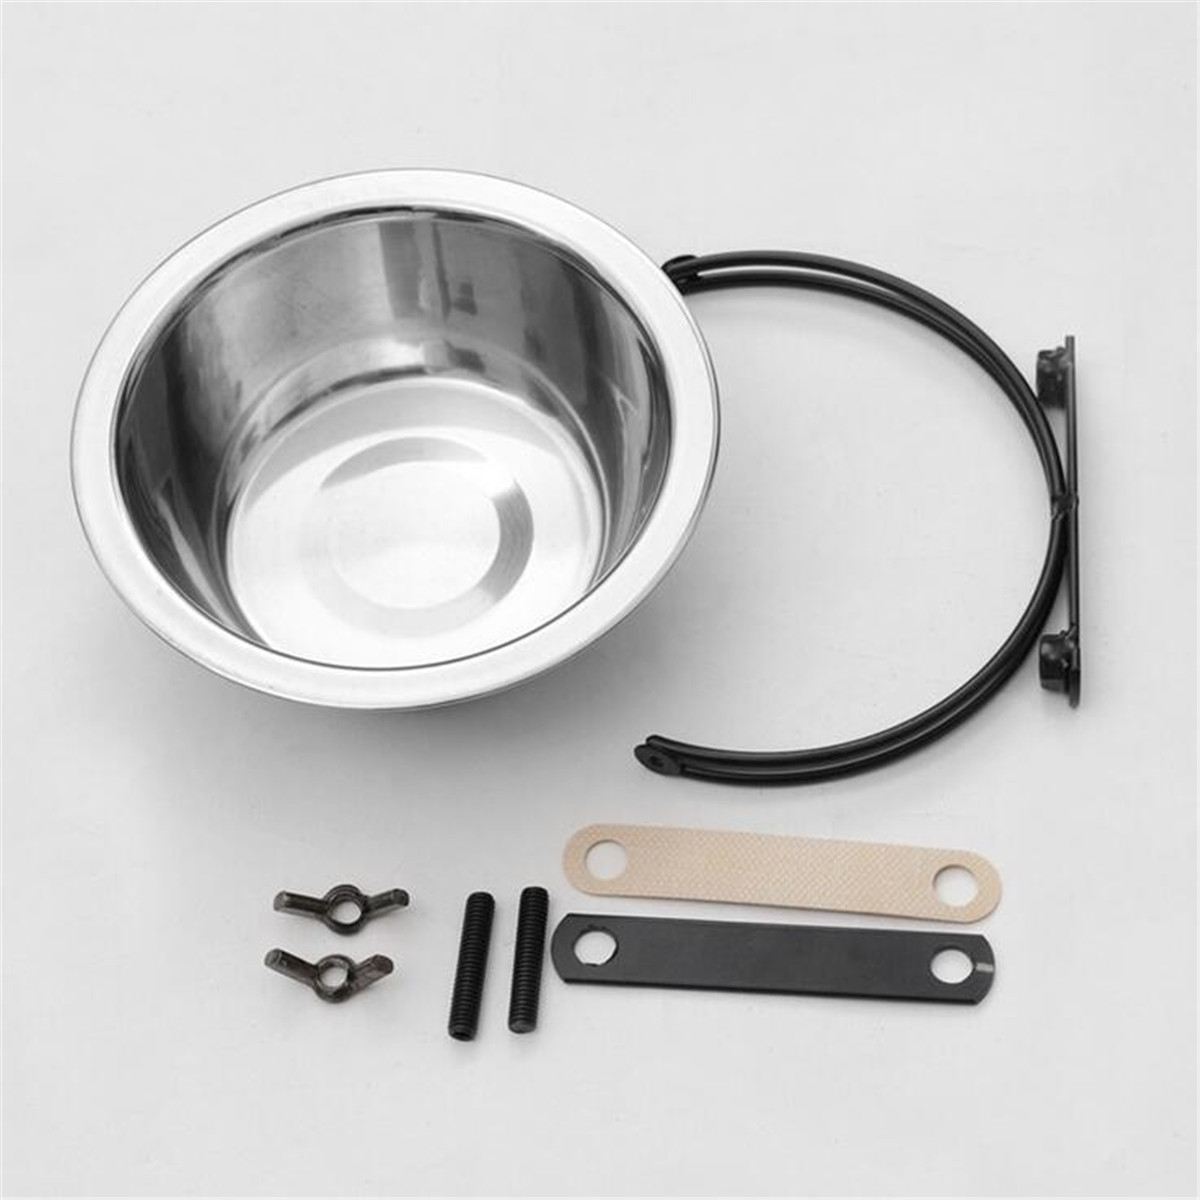 Stainless-Steel-Pet-Dog-Puppy-Hanging-Food-Water-Bowl-Feeder-For-Crate-Cage-Coop-Decorations-1182035